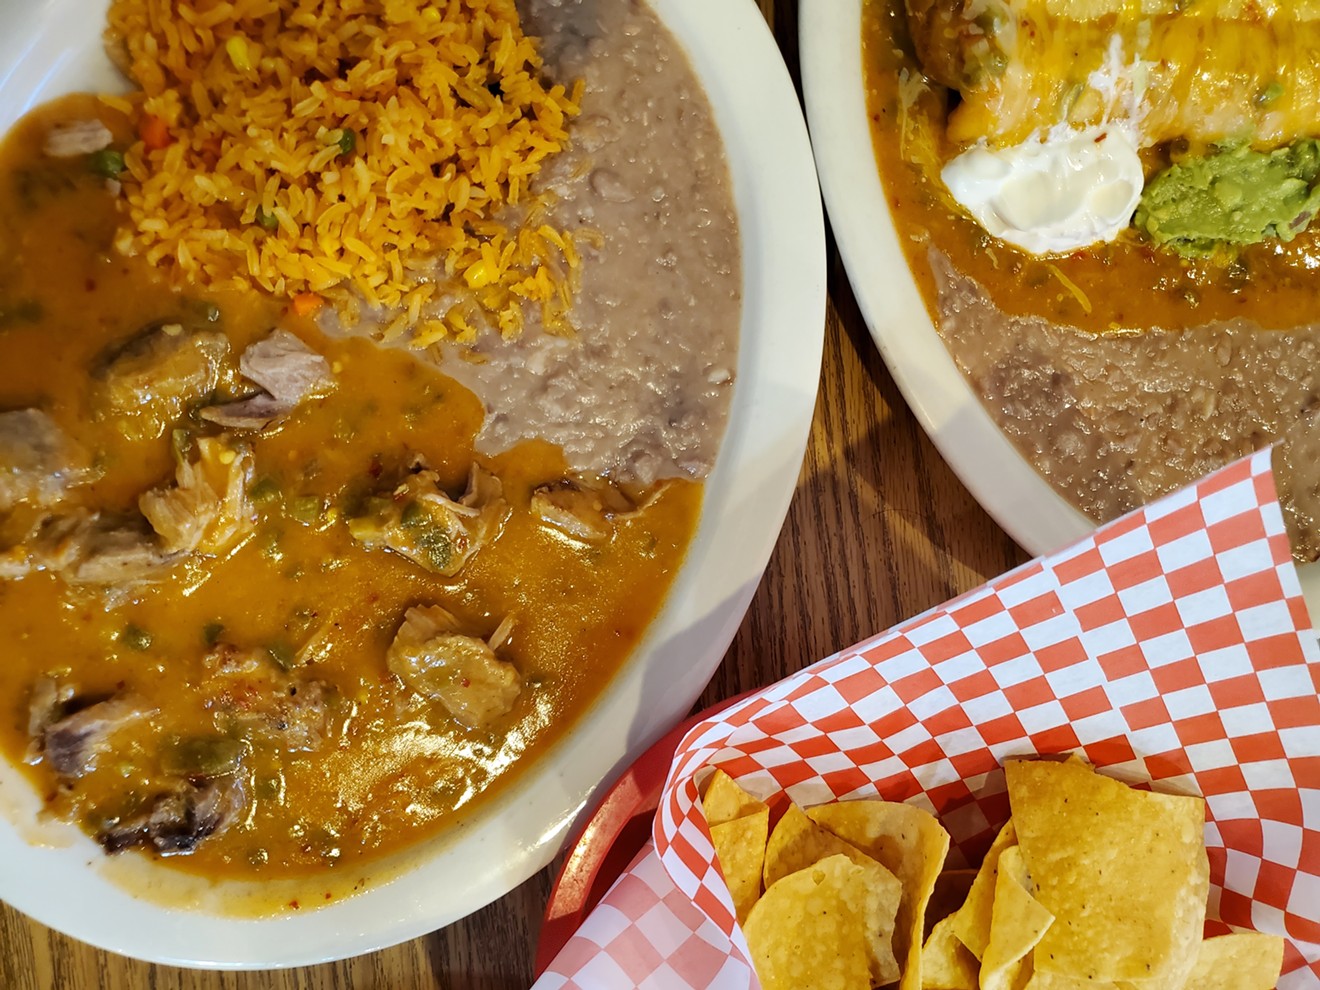 The green chile plate at Chakas.